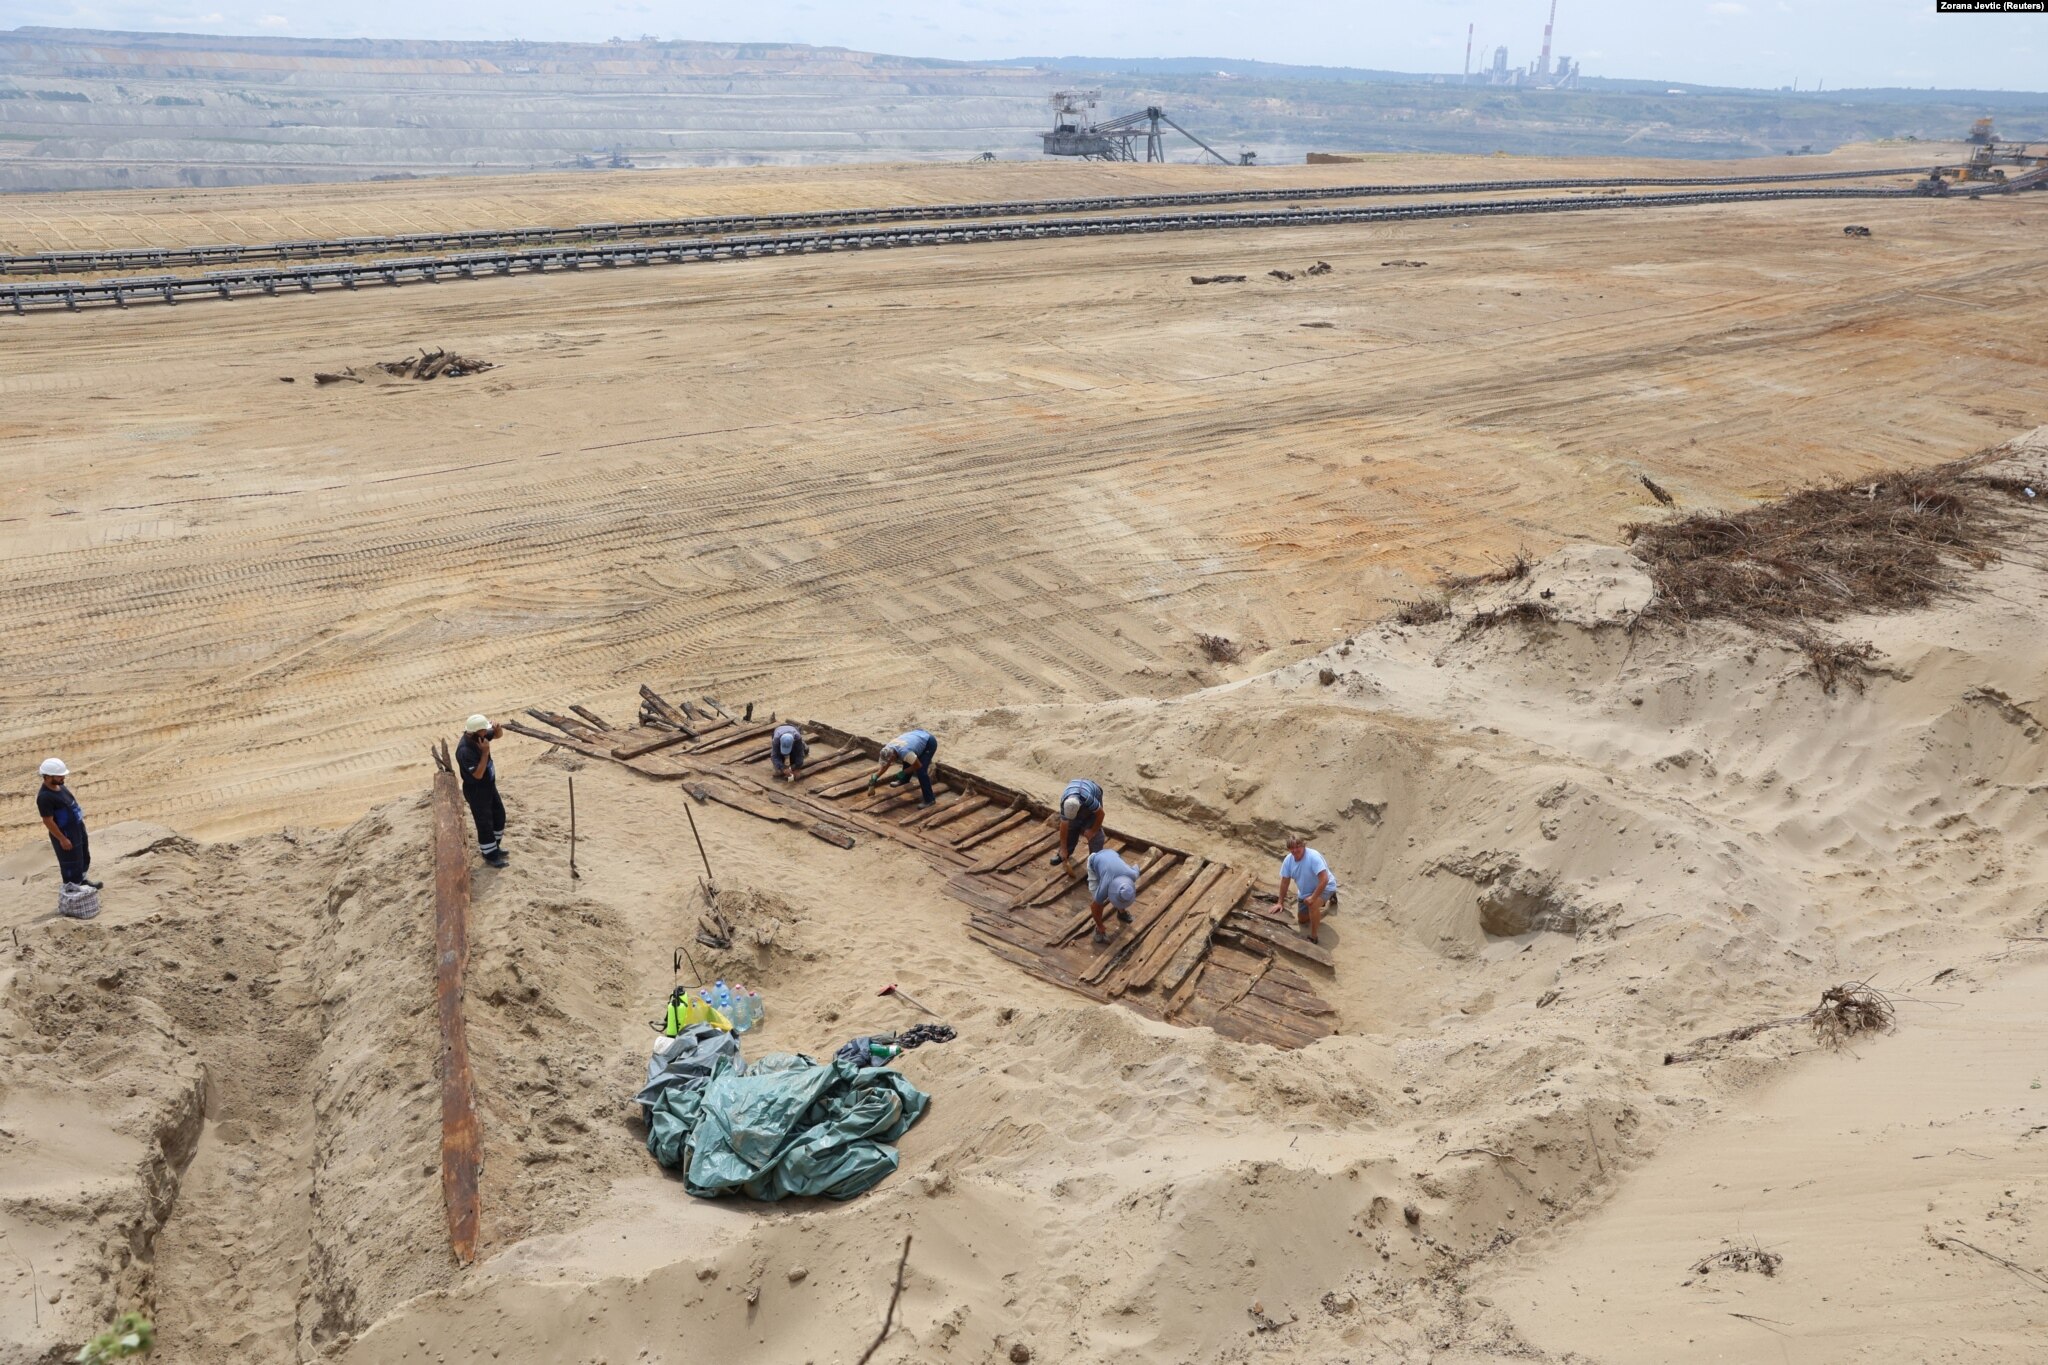 Archaeologists near Kostalac, Serbia, painstakingly brush sand and soil off the woodwork of an ancient Roman ship on August 2. The ship was discovered by an excavator crew at the Drmno mine.